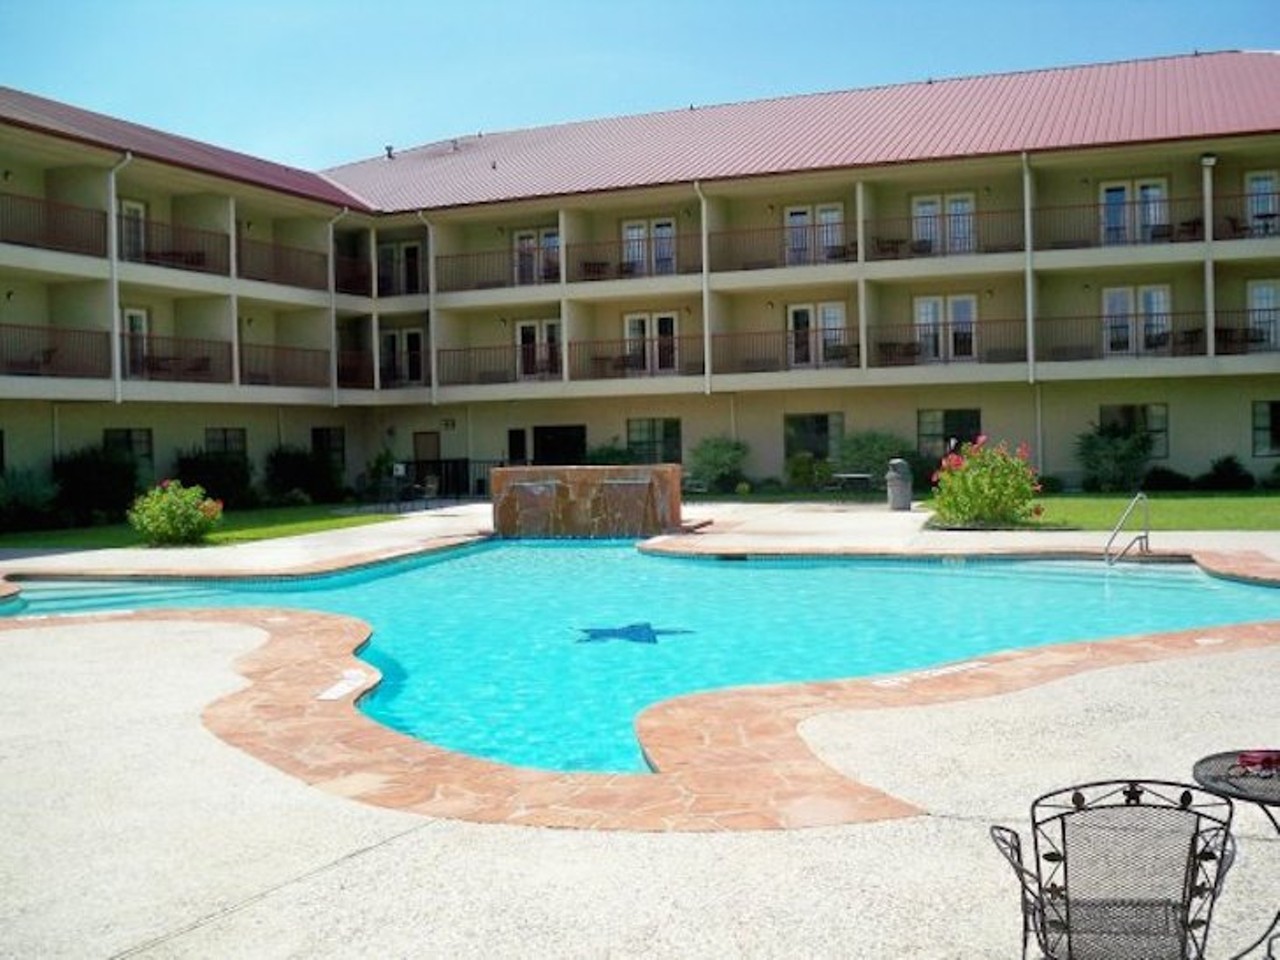 Texas-Shaped Swimming Pool 
2114 Sidney Baker St., 1 (877) 859-5095, ihg.com/holidayinnexpress
Do you really, really love Texas? Book a room and take a jump into Kerrville's very own Texas-shaped pool, a feature at the Holiday Inn Express & Suites Kerrville. 
Photo via Facebook (Kerrville Convention & Visitors Bureau)